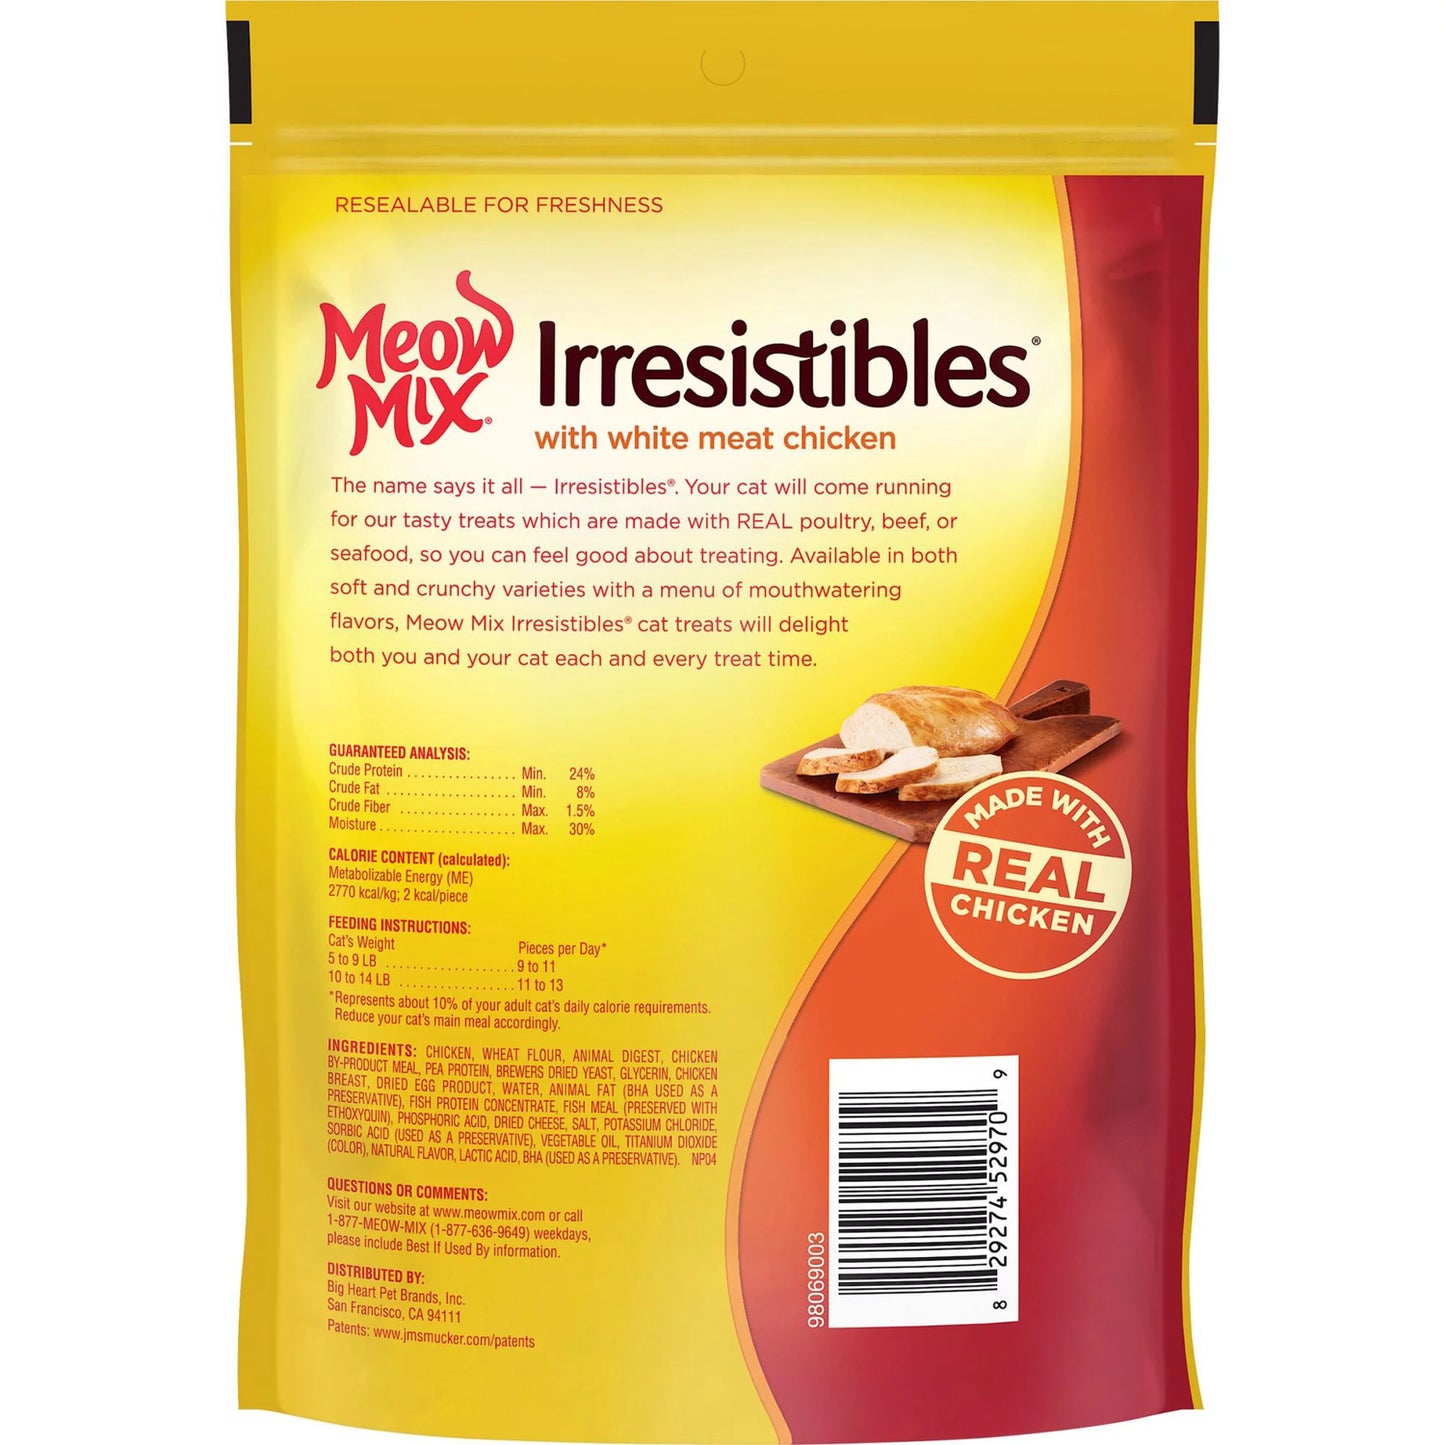 Meow Mix Irresistibles Cat Treats - Soft with White Meat Chicken, 12-Ounce Bag